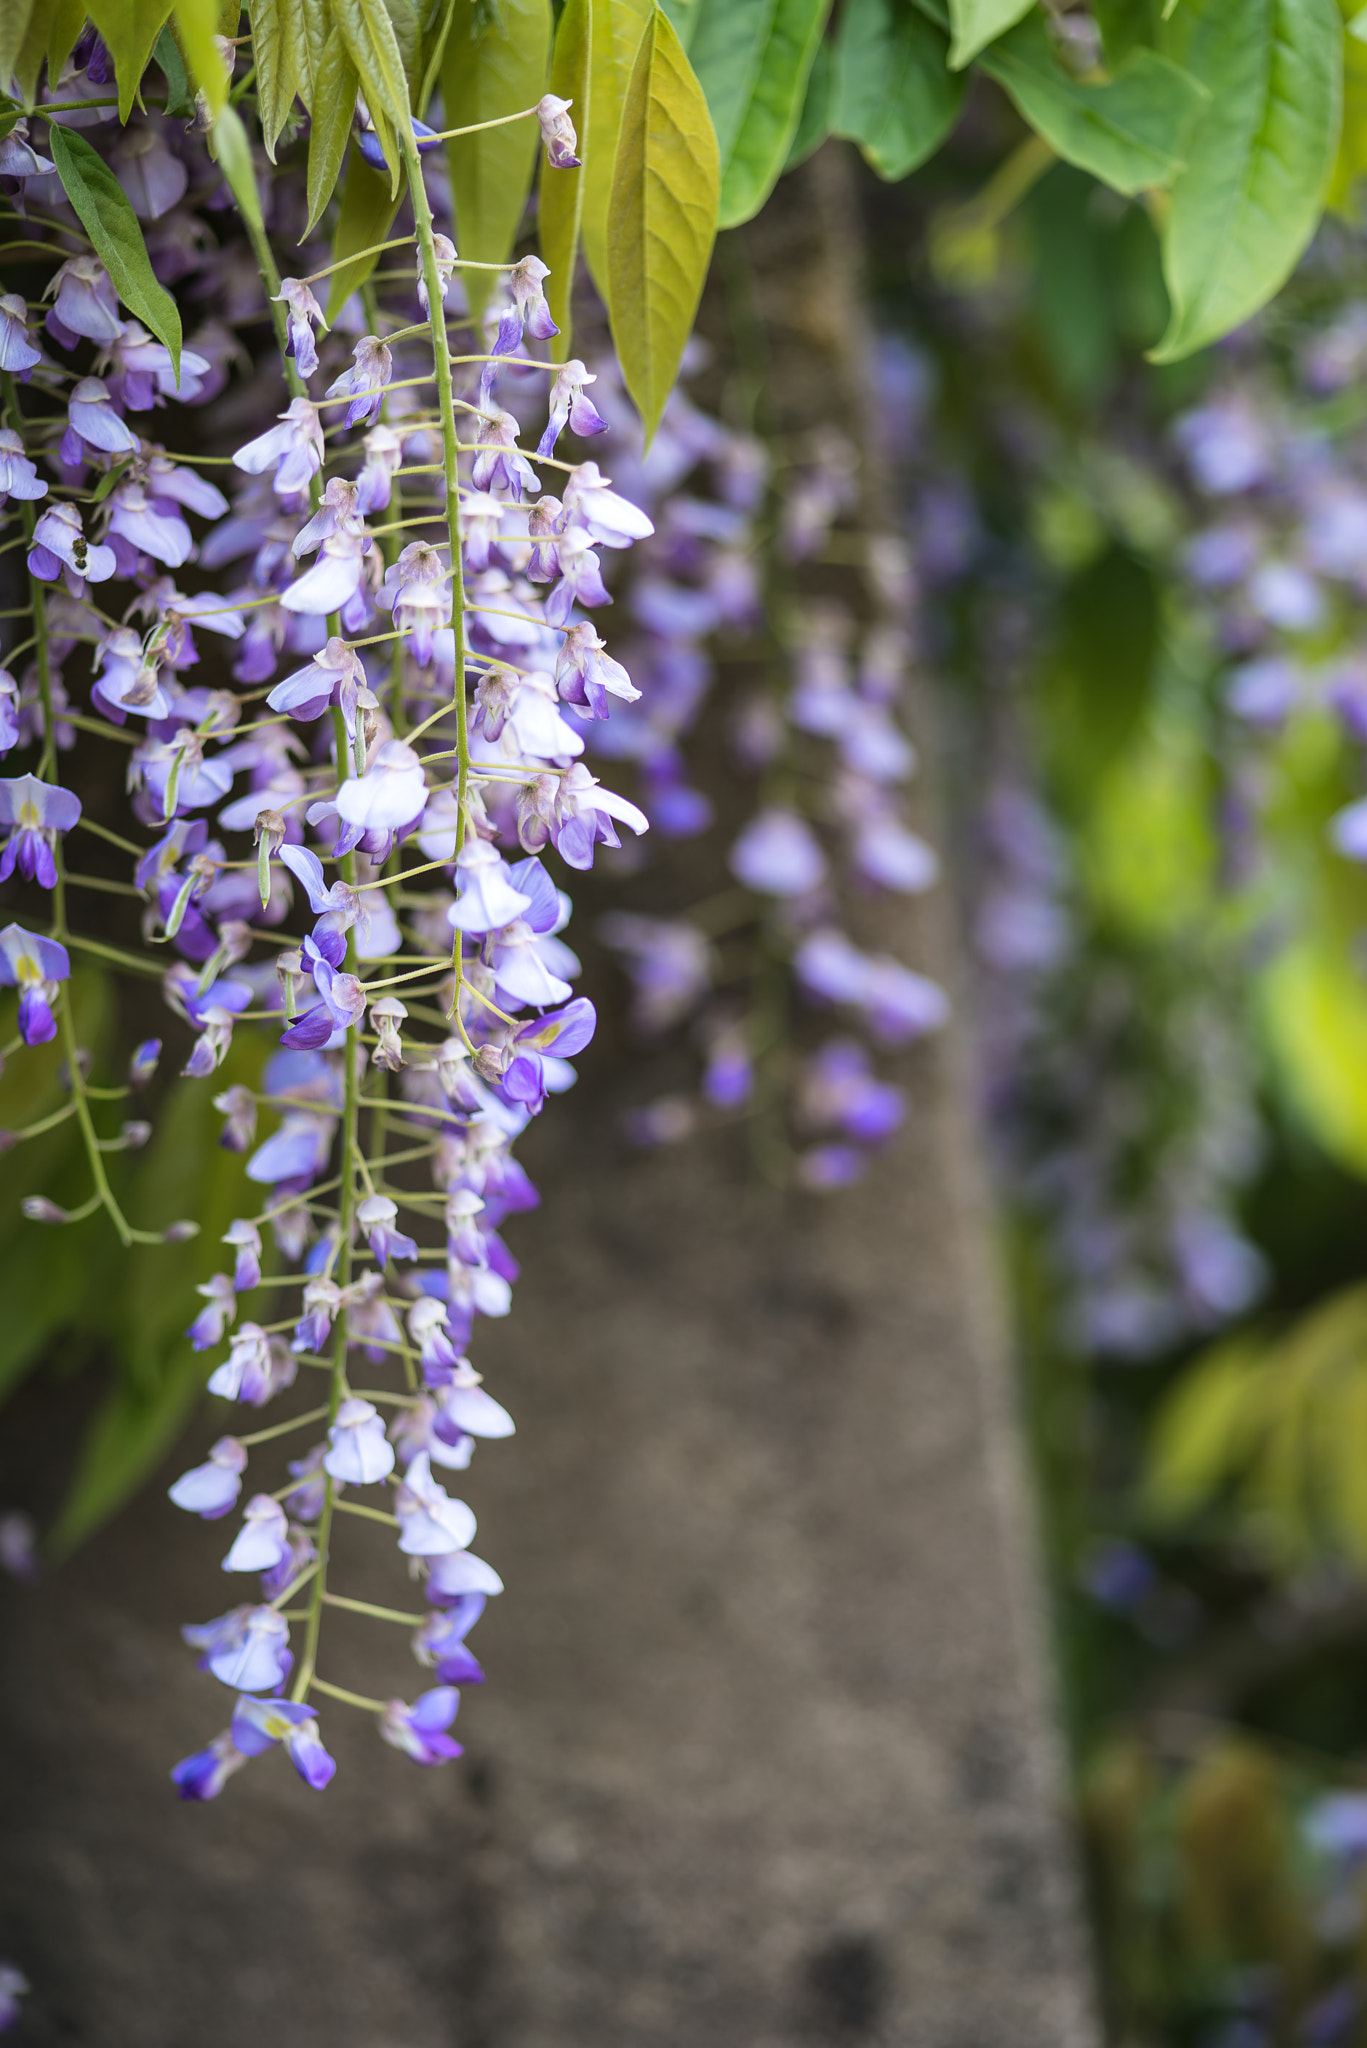 Nikon D600 + Sigma 105mm F2.8 EX DG Macro sample photo. Purple wisteria draping over garden ornaments in summer growth l photography